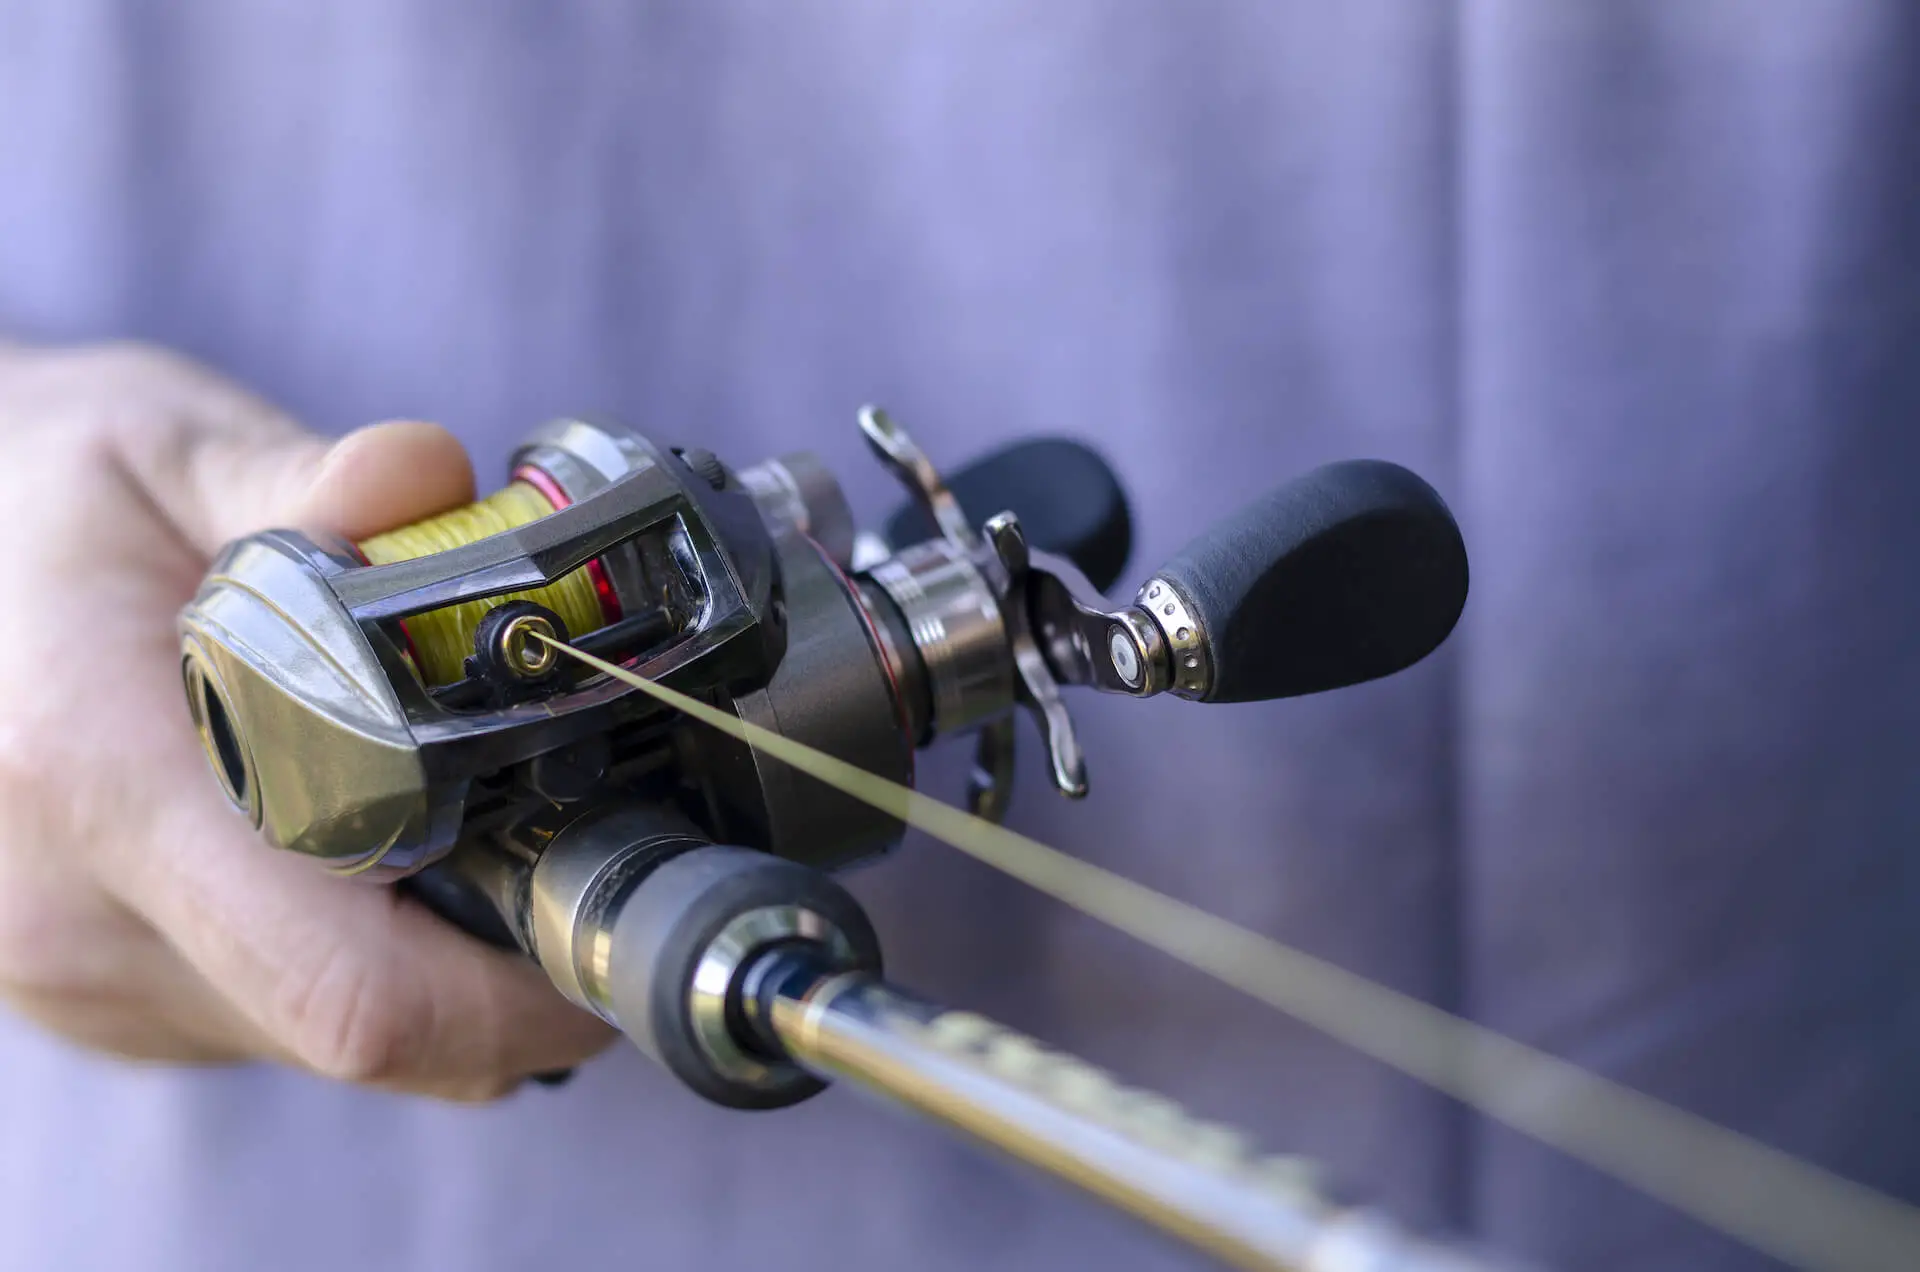 Best Baitcasting Reels Review: Man holding a baitcasting rod and reel